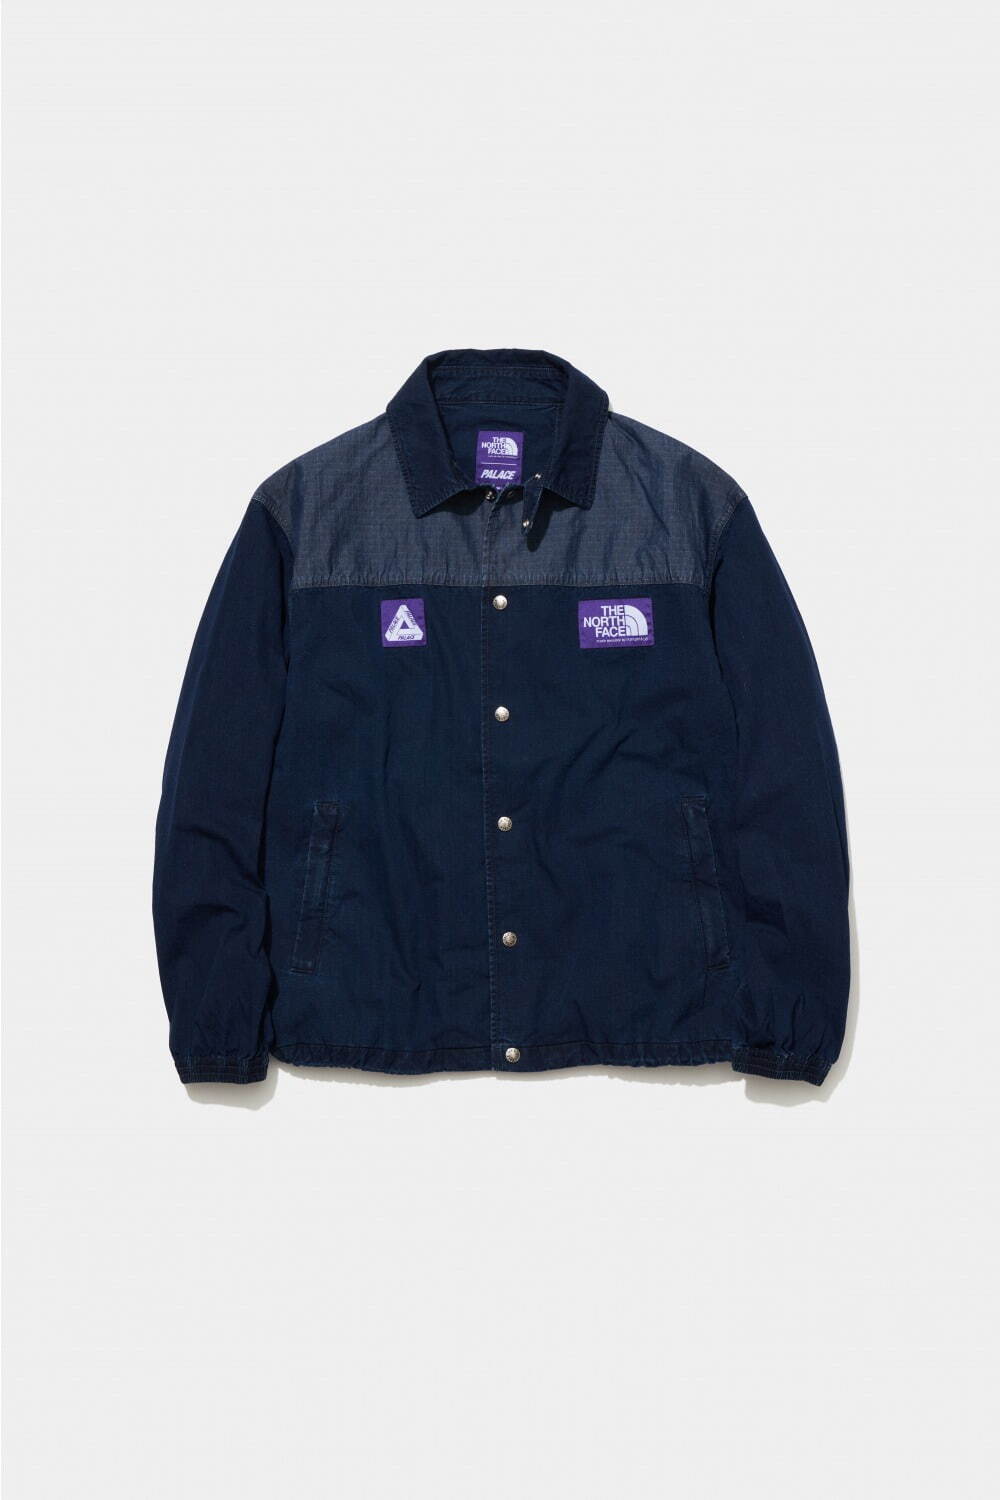 Palace Skateboards The North Face パレス